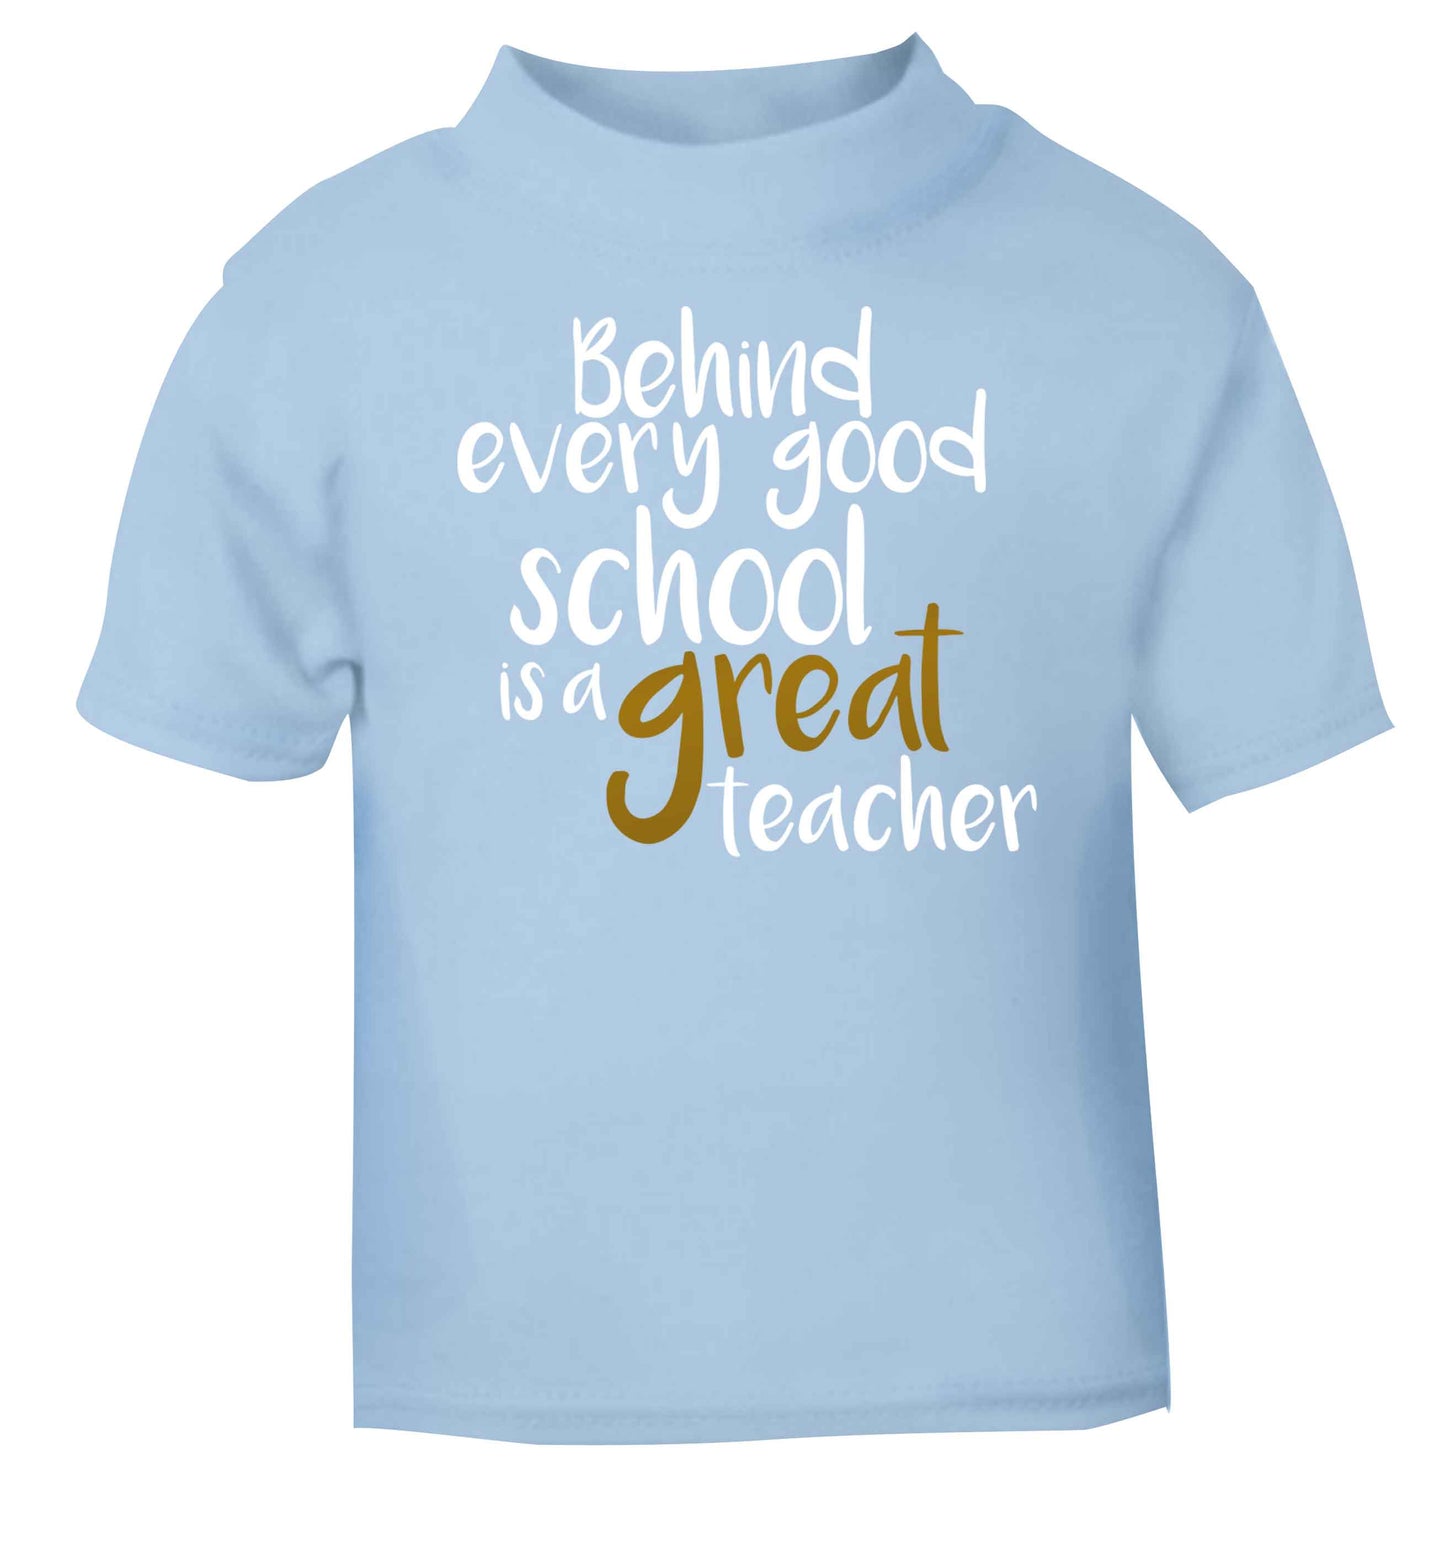 Behind every good school is a great teacher light blue baby toddler Tshirt 2 Years